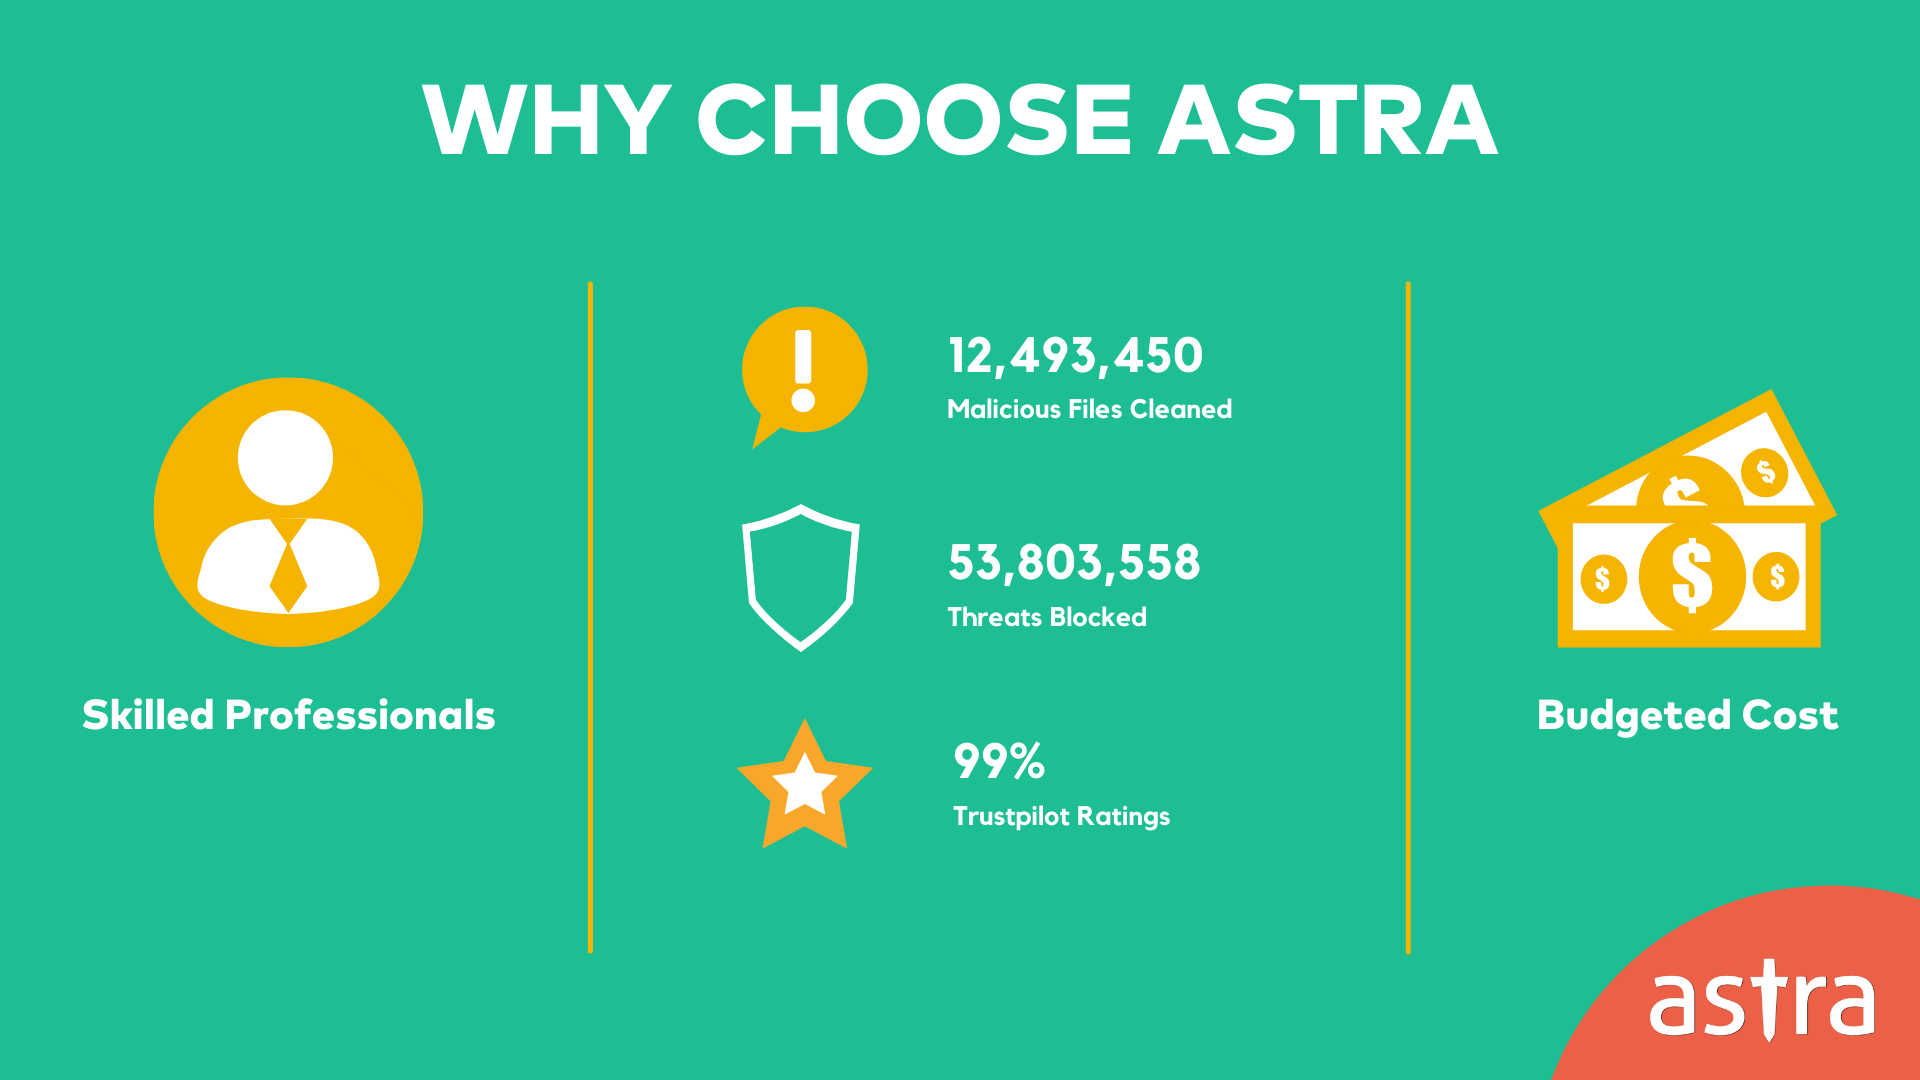 Why Choose Astra?